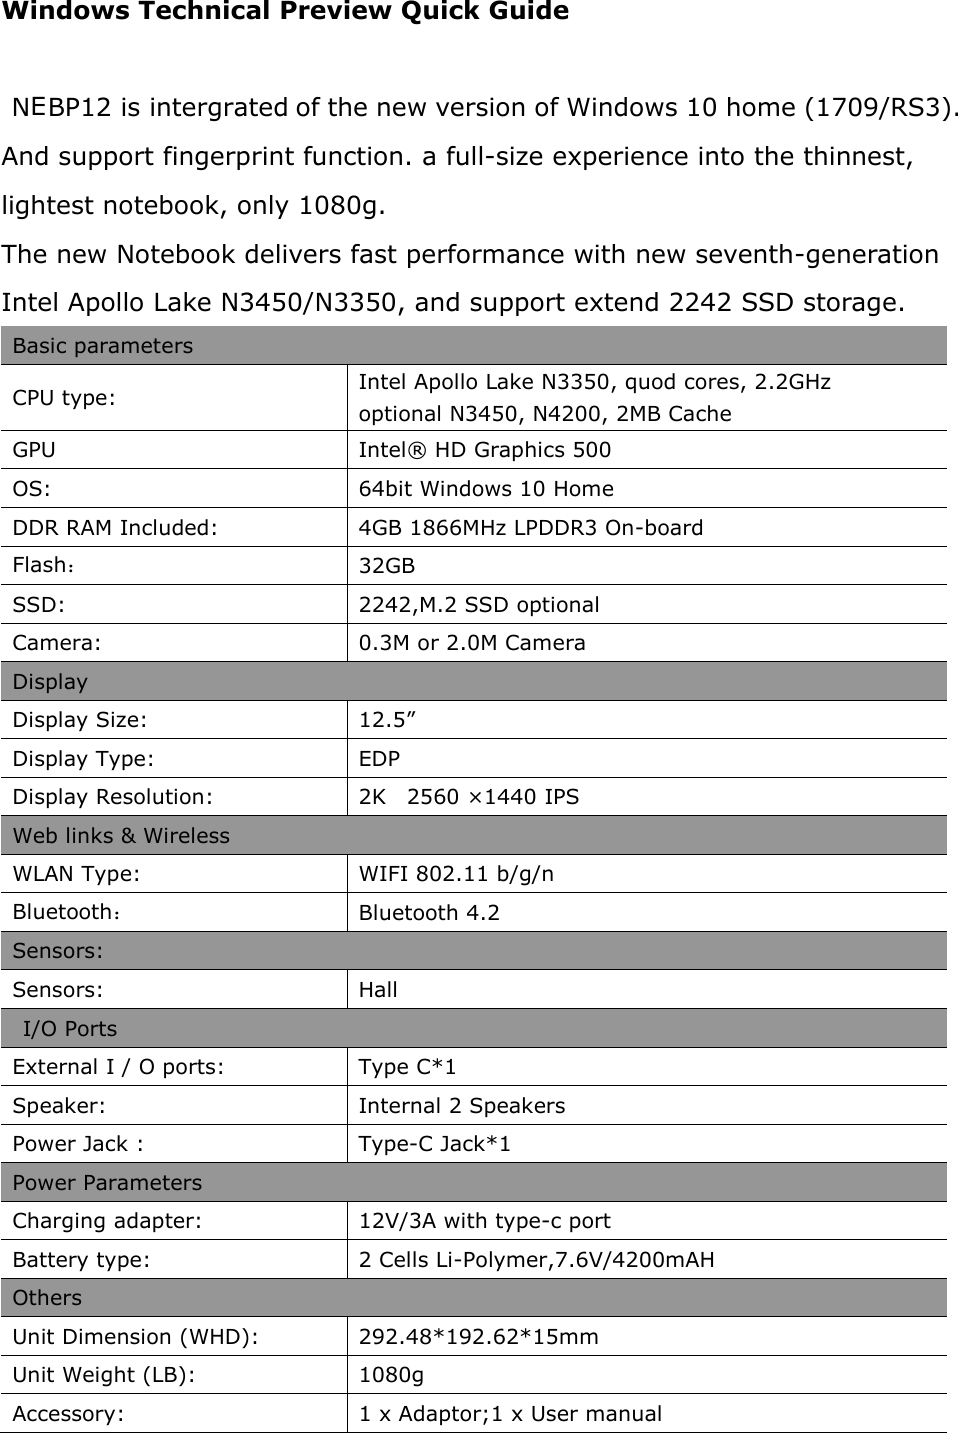 Windows Technical Preview Quick Guide  NEBP12 is intergrated of the new version of Windows 10 home (1709/RS3). And support fingerprint function. a full-size experience into the thinnest, lightest notebook, only 1080g. The new Notebook delivers fast performance with new seventh-generation Intel Apollo Lake N3450/N3350, and support extend 2242 SSD storage. Basic parameters CPU type:  Intel Apollo Lake N3350, quod cores, 2.2GHz optional N3450, N4200, 2MB Cache GPU   Intel® HD Graphics 500 OS:  64bit Windows 10 Home DDR RAM Included:  4GB 1866MHz LPDDR3 On-board Flash： 32GB SSD:  2242,M.2 SSD optional Camera:  0.3M or 2.0M Camera Display Display Size:  12.5” Display Type:  EDP Display Resolution:  2K    2560 ×1440 IPS Web links &amp; Wireless WLAN Type:  WIFI 802.11 b/g/n  Bluetooth： Bluetooth 4.2 Sensors: Sensors:  Hall   I/O Ports External I / O ports:  Type C*1 Speaker:  Internal 2 Speakers Power Jack :  Type-C Jack*1 Power Parameters Charging adapter:  12V/3A with type-c port Battery type:  2 Cells Li-Polymer,7.6V/4200mAH Others Unit Dimension (WHD):  292.48*192.62*15mm Unit Weight (LB):  1080g Accessory:  1 x Adaptor;1 x User manual 